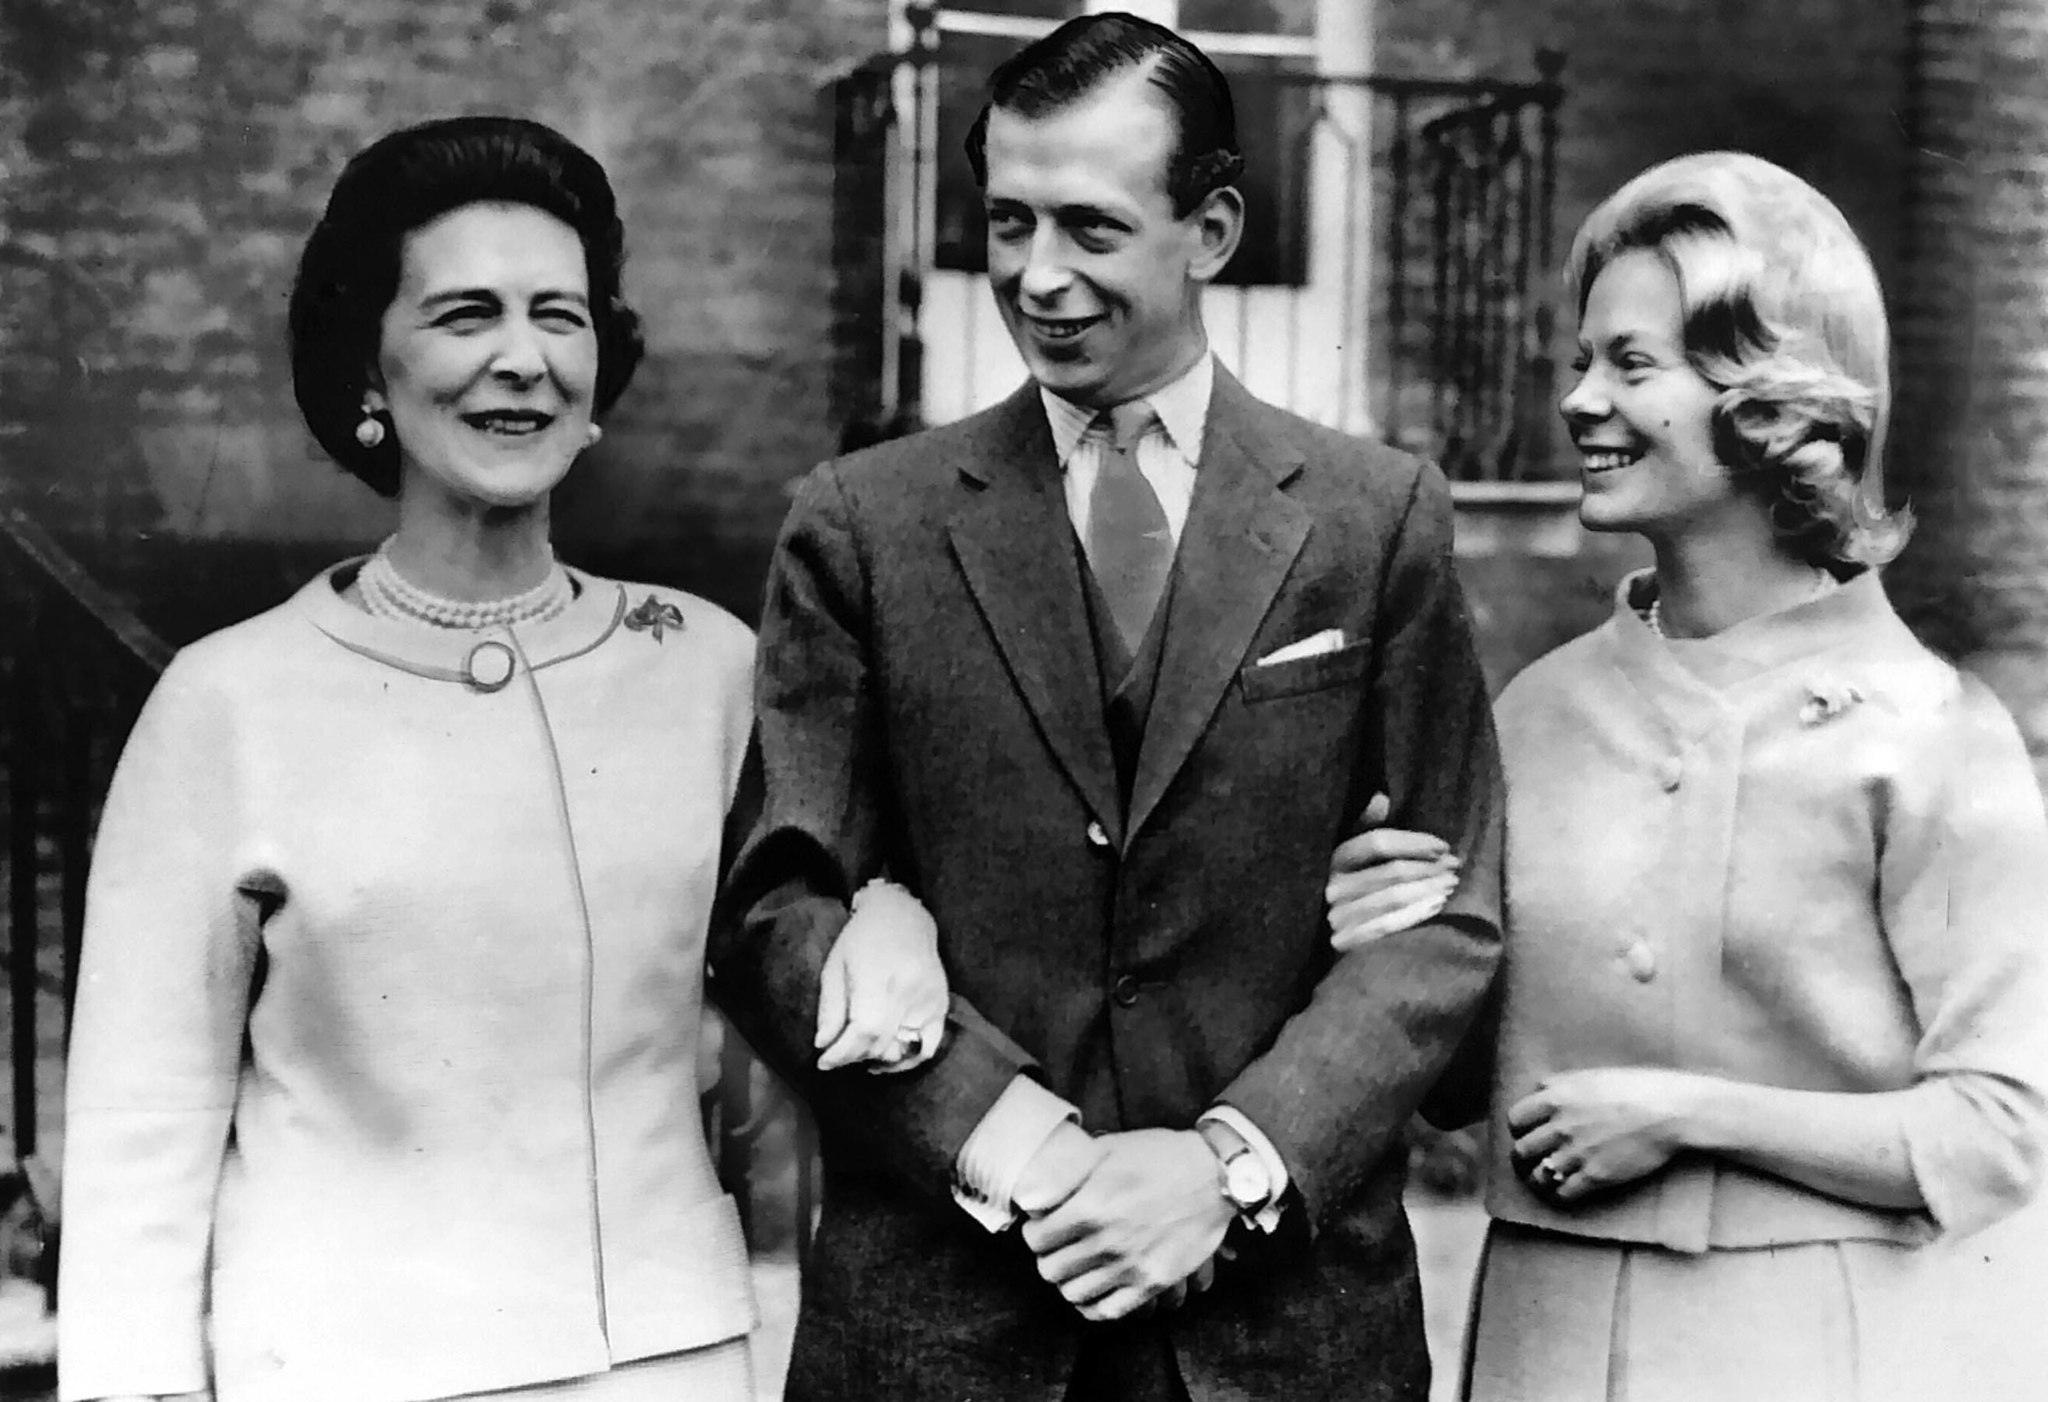 March 11, 1961: Duchess of Kent, at the left, walks with her son, Prince Edward, Duke of Kent and hi